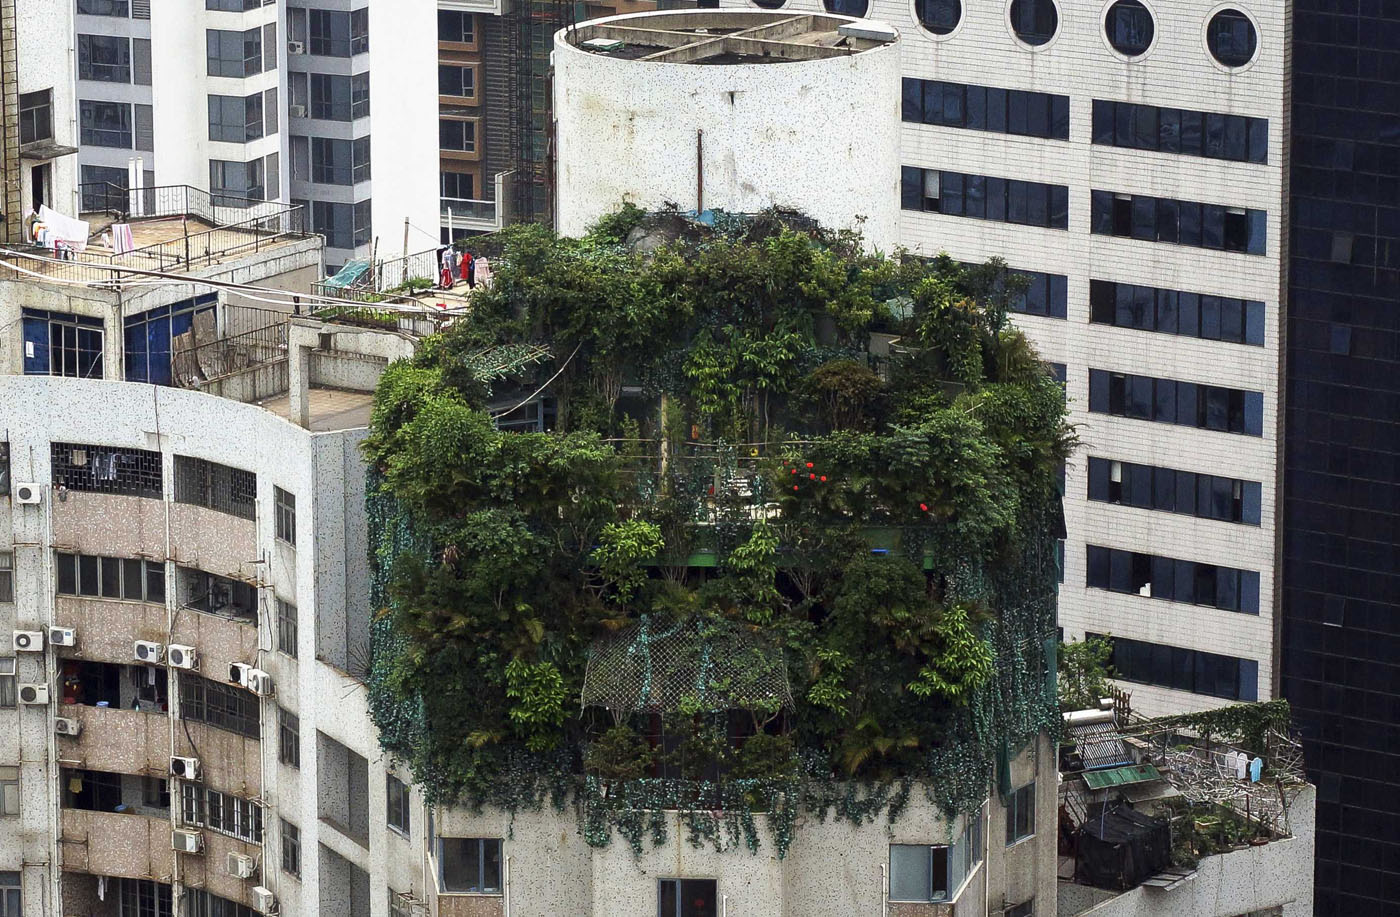 A suspected illegal construction is seen covered by green plants atop a 19-story residential building in Guangzhou, China on April 11. The suspected illegal construction was built 10 years ago. Local law enforcement department discovered the construction back in 2012, but have failed to find the owner since then, local media reported.